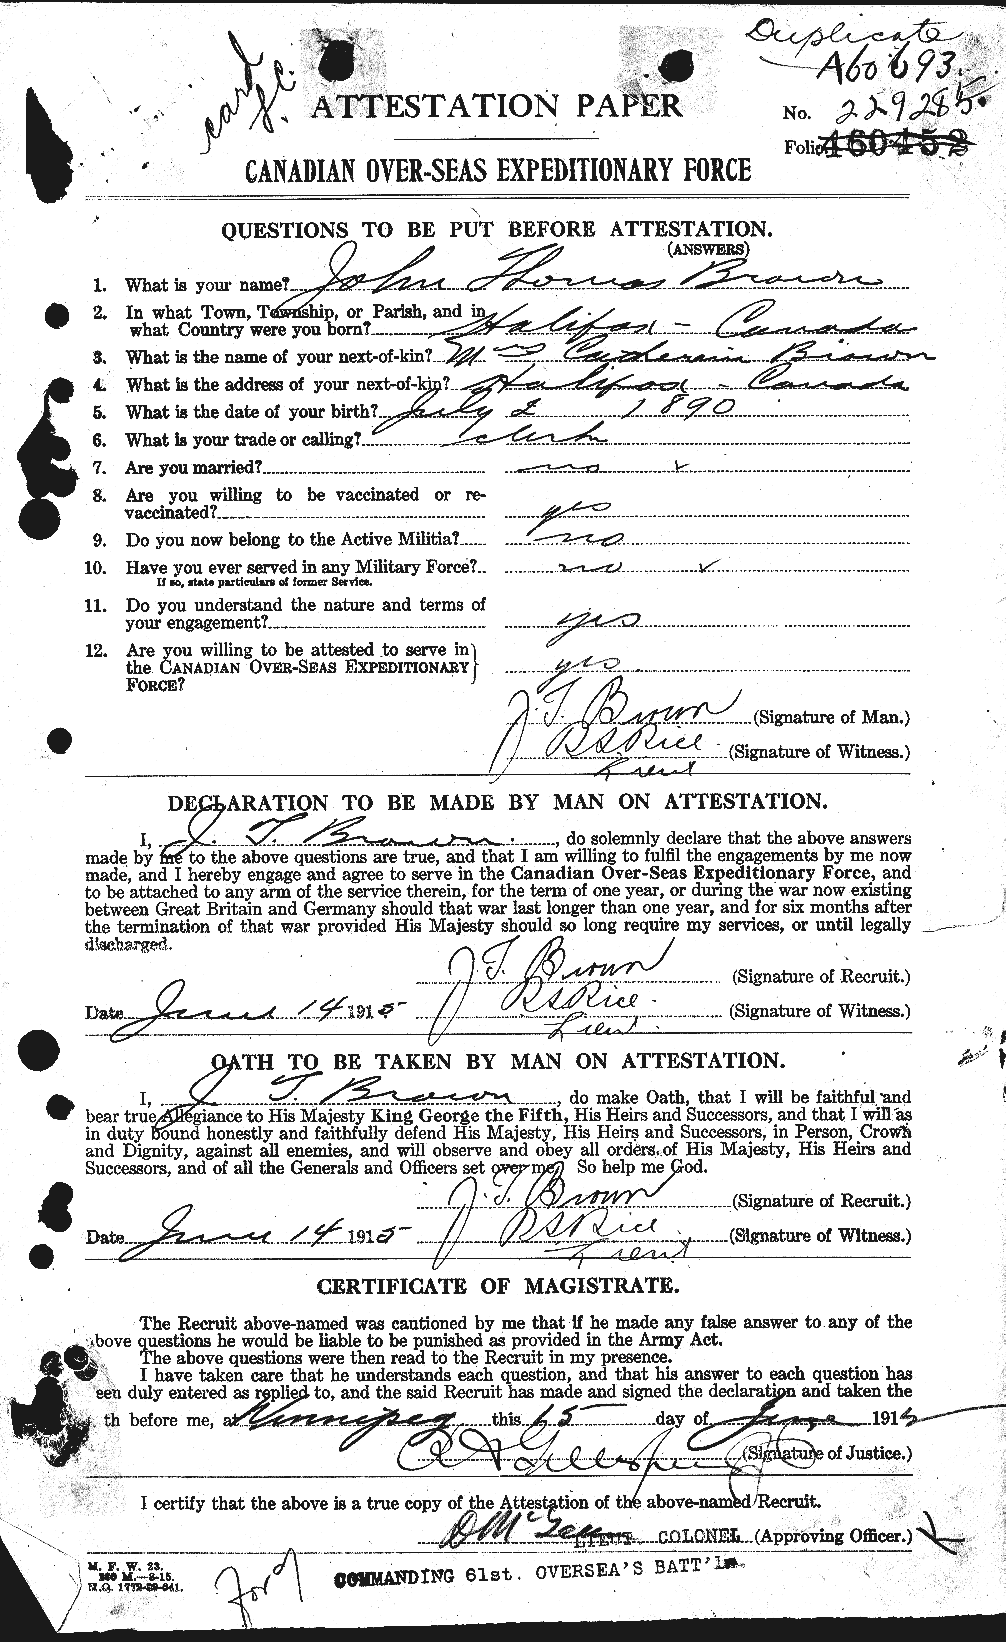 Personnel Records of the First World War - CEF 265883a